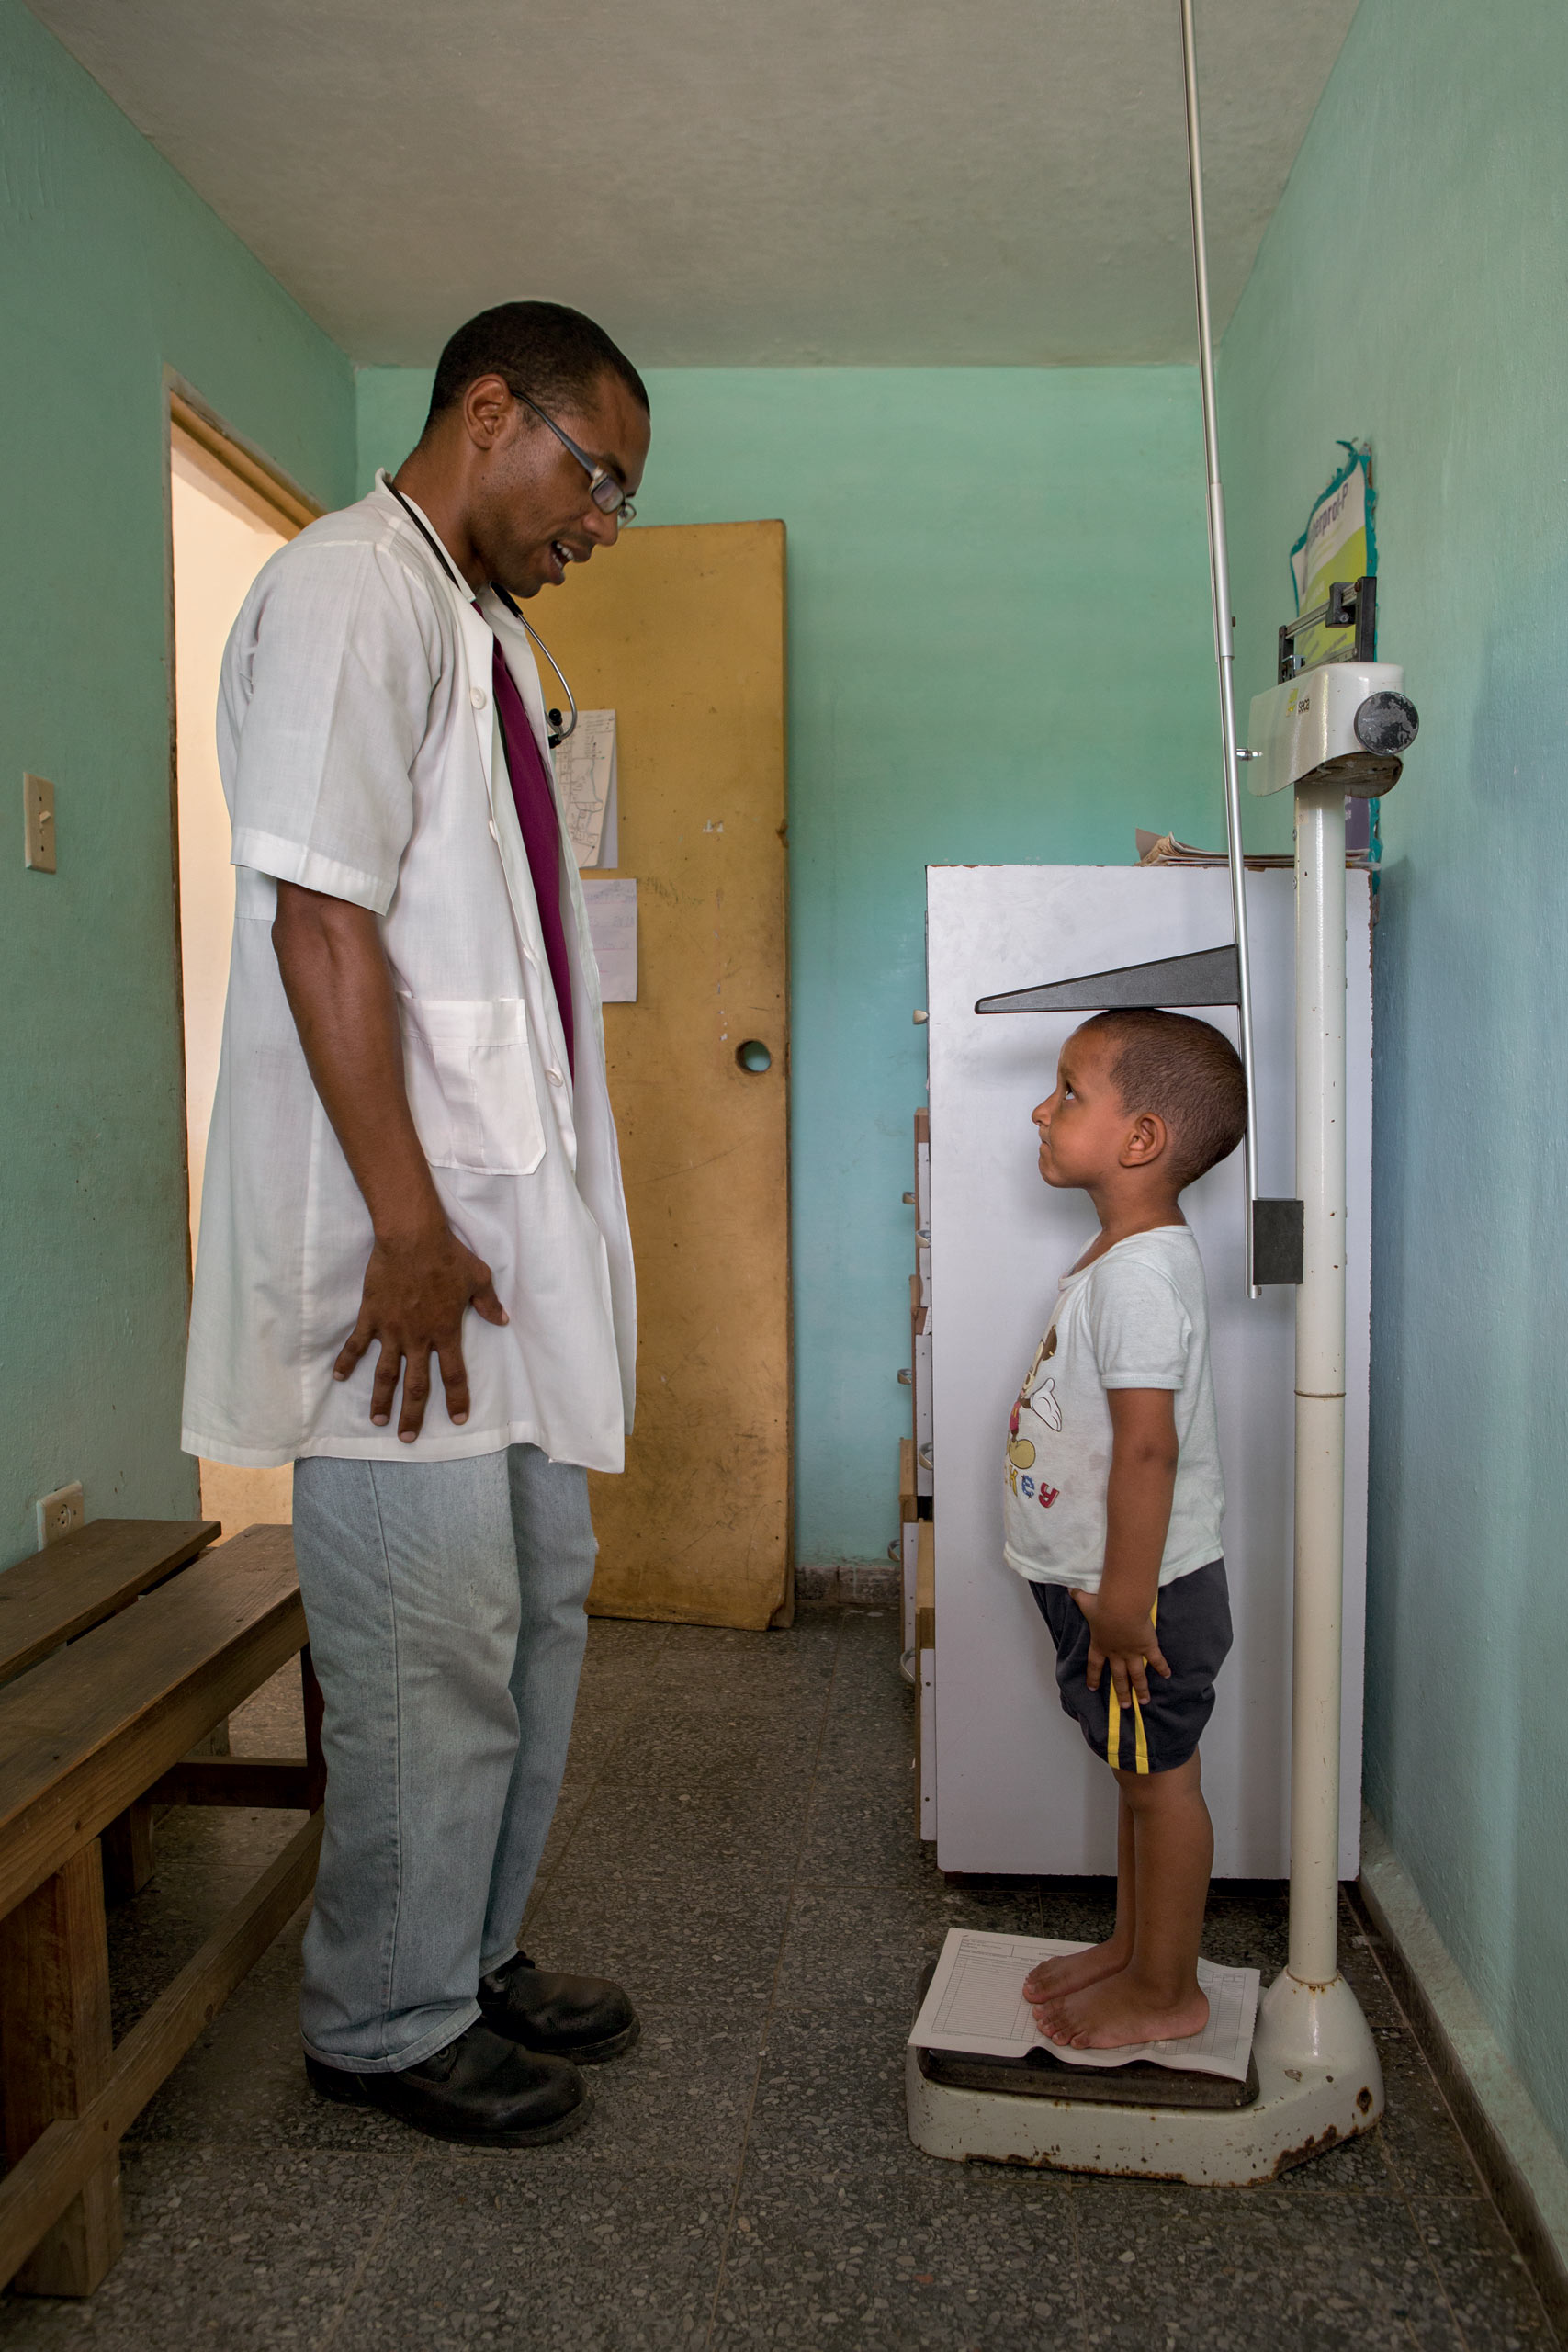 Dr. Rodriguez provides primary care to Shexley Benent, 2, at walk-in clinic Number 14, La Santa Fe, Isle of Youth.